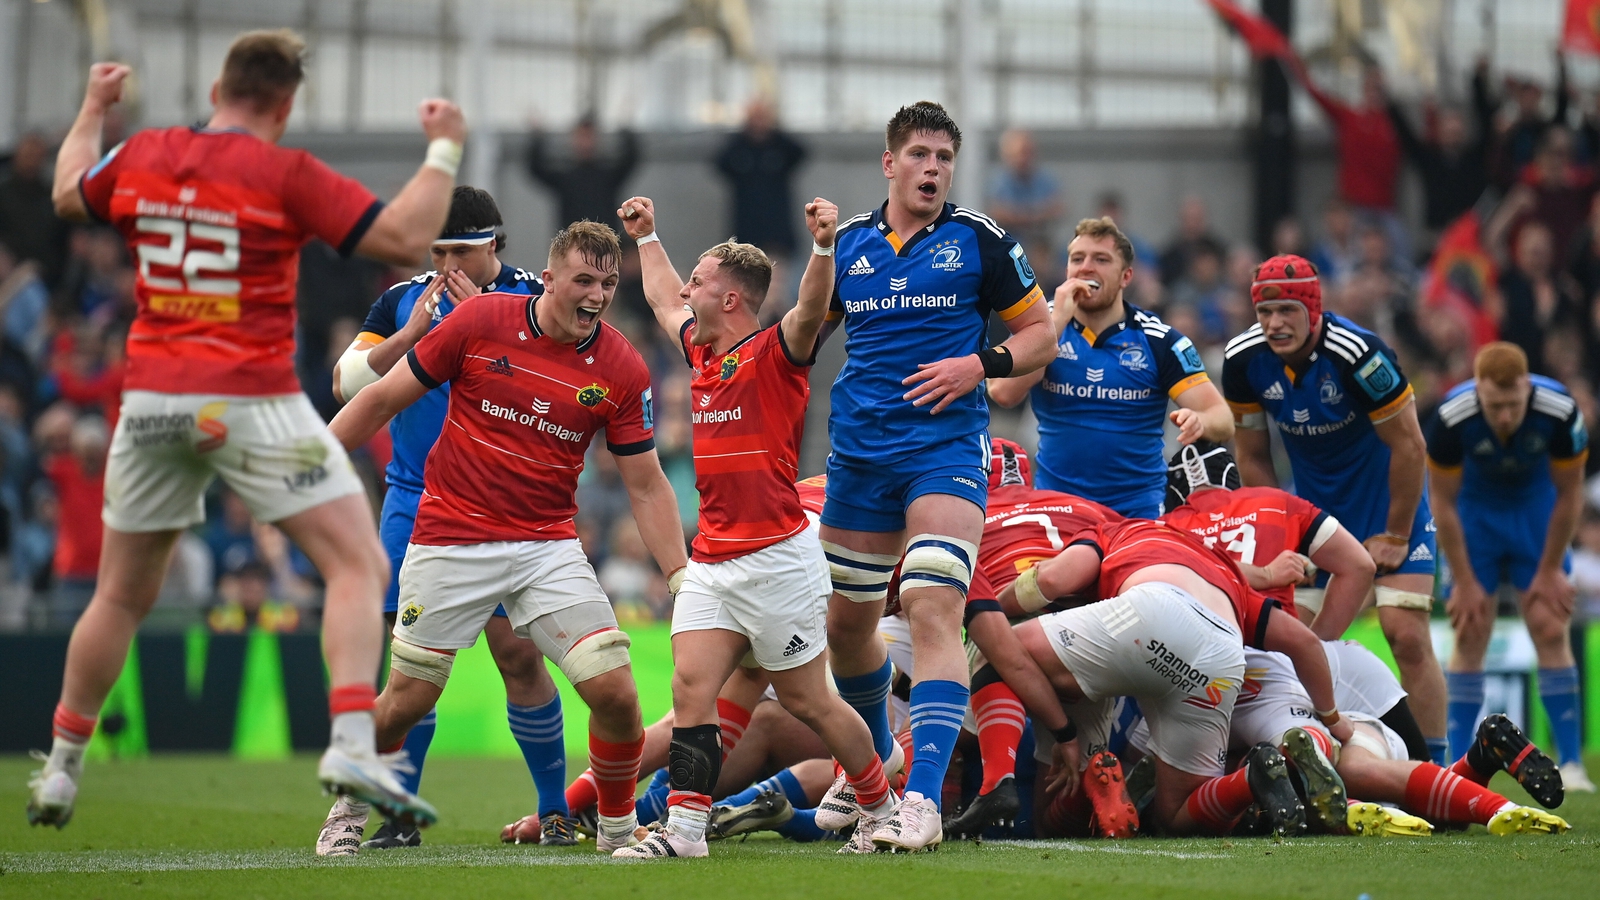 Johne Murphy: Leinster-Munster rivalry as healthy as ever